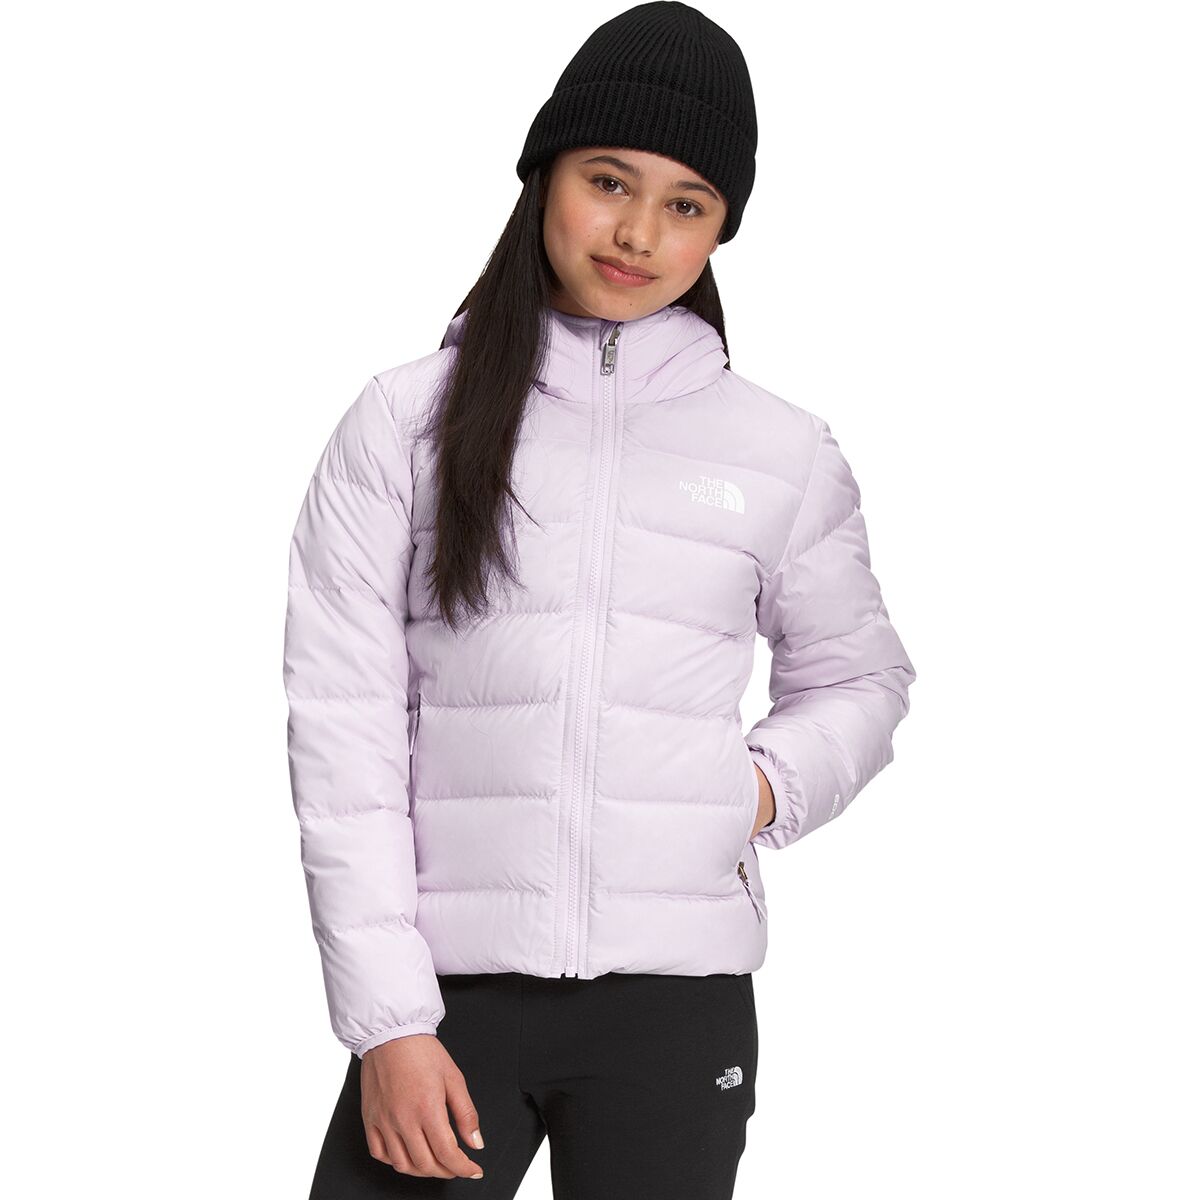 The North Face North Down Reversible Hooded Jacket - Girls'